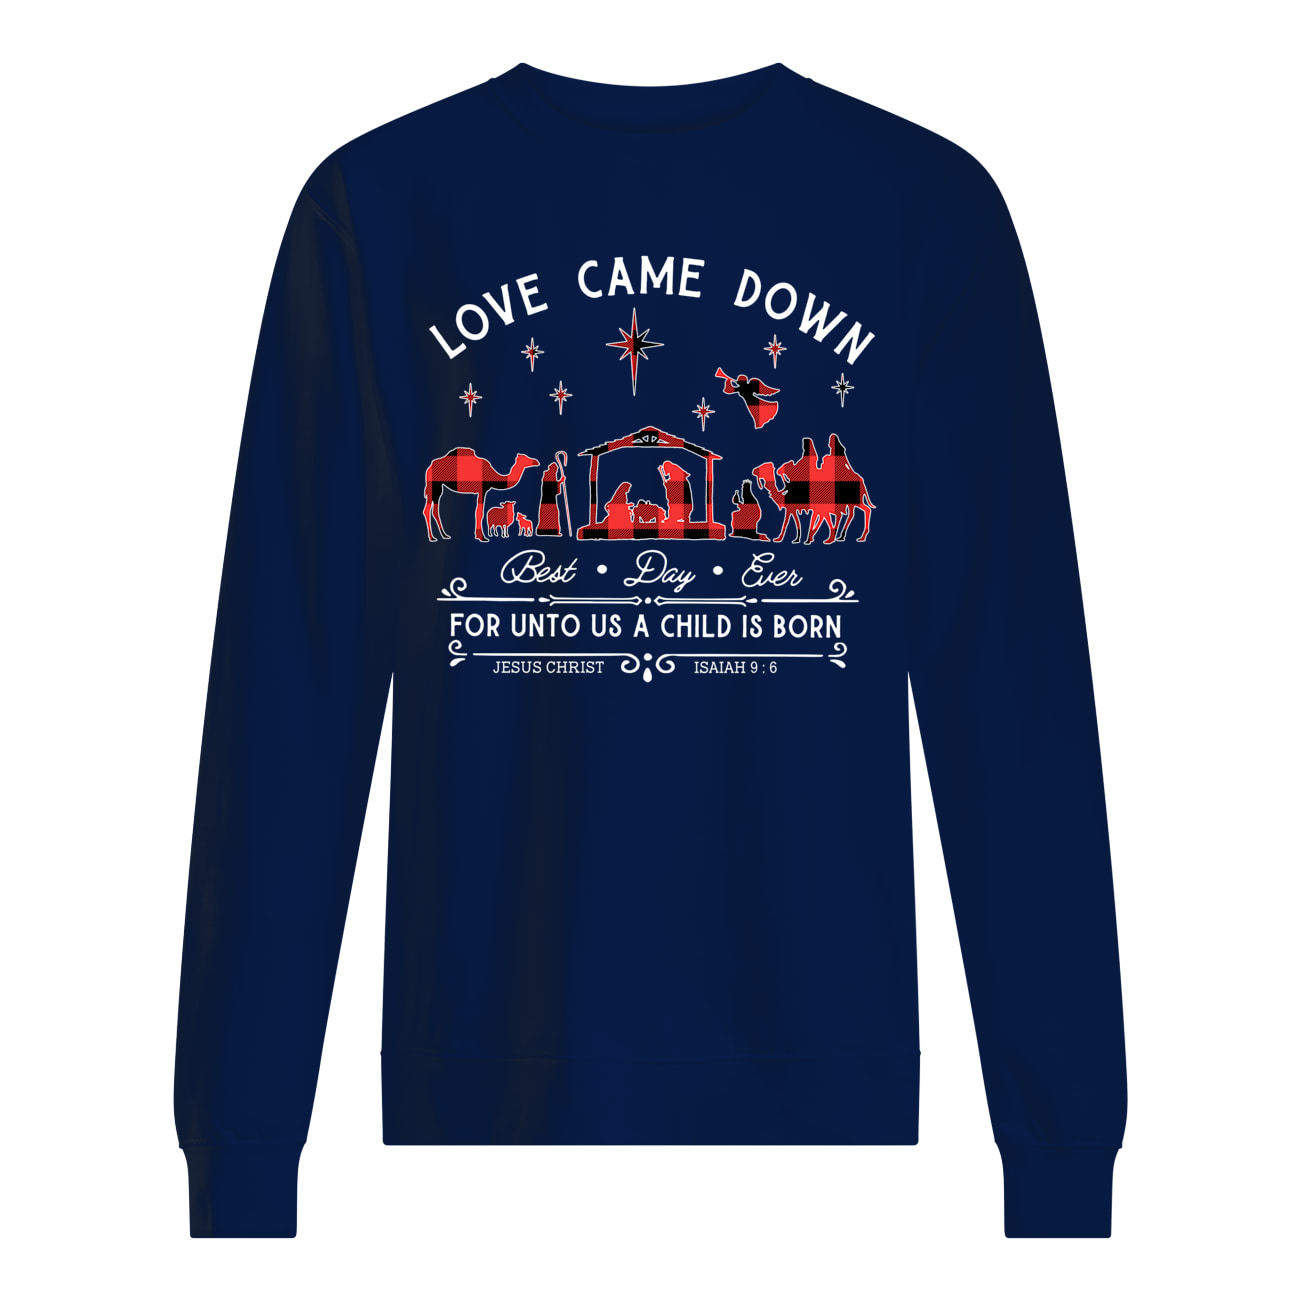 Love came down best day ever for unto us a child is born sweatshirt